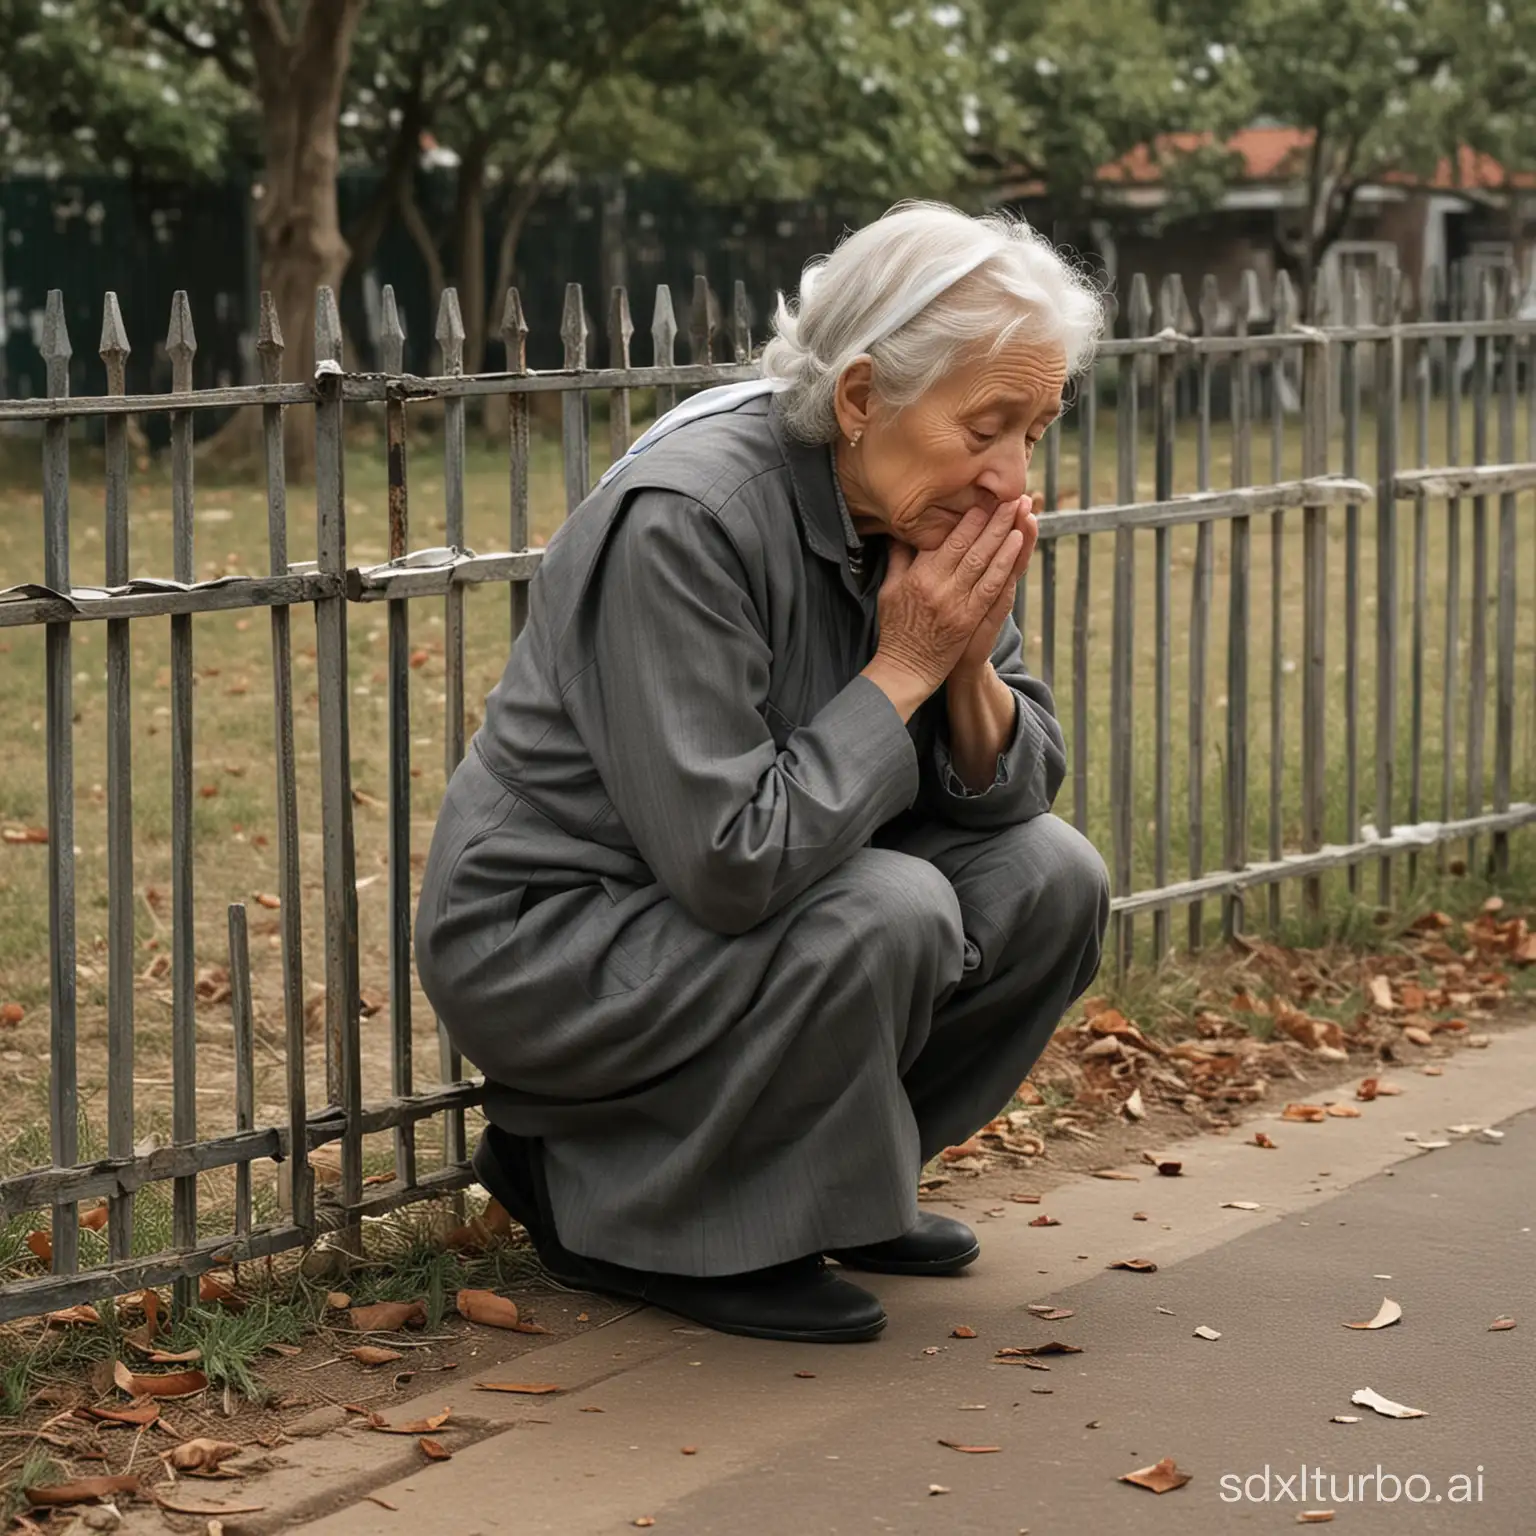 Grandmother-Grieving-at-School-Gate-with-Lingering-Soul